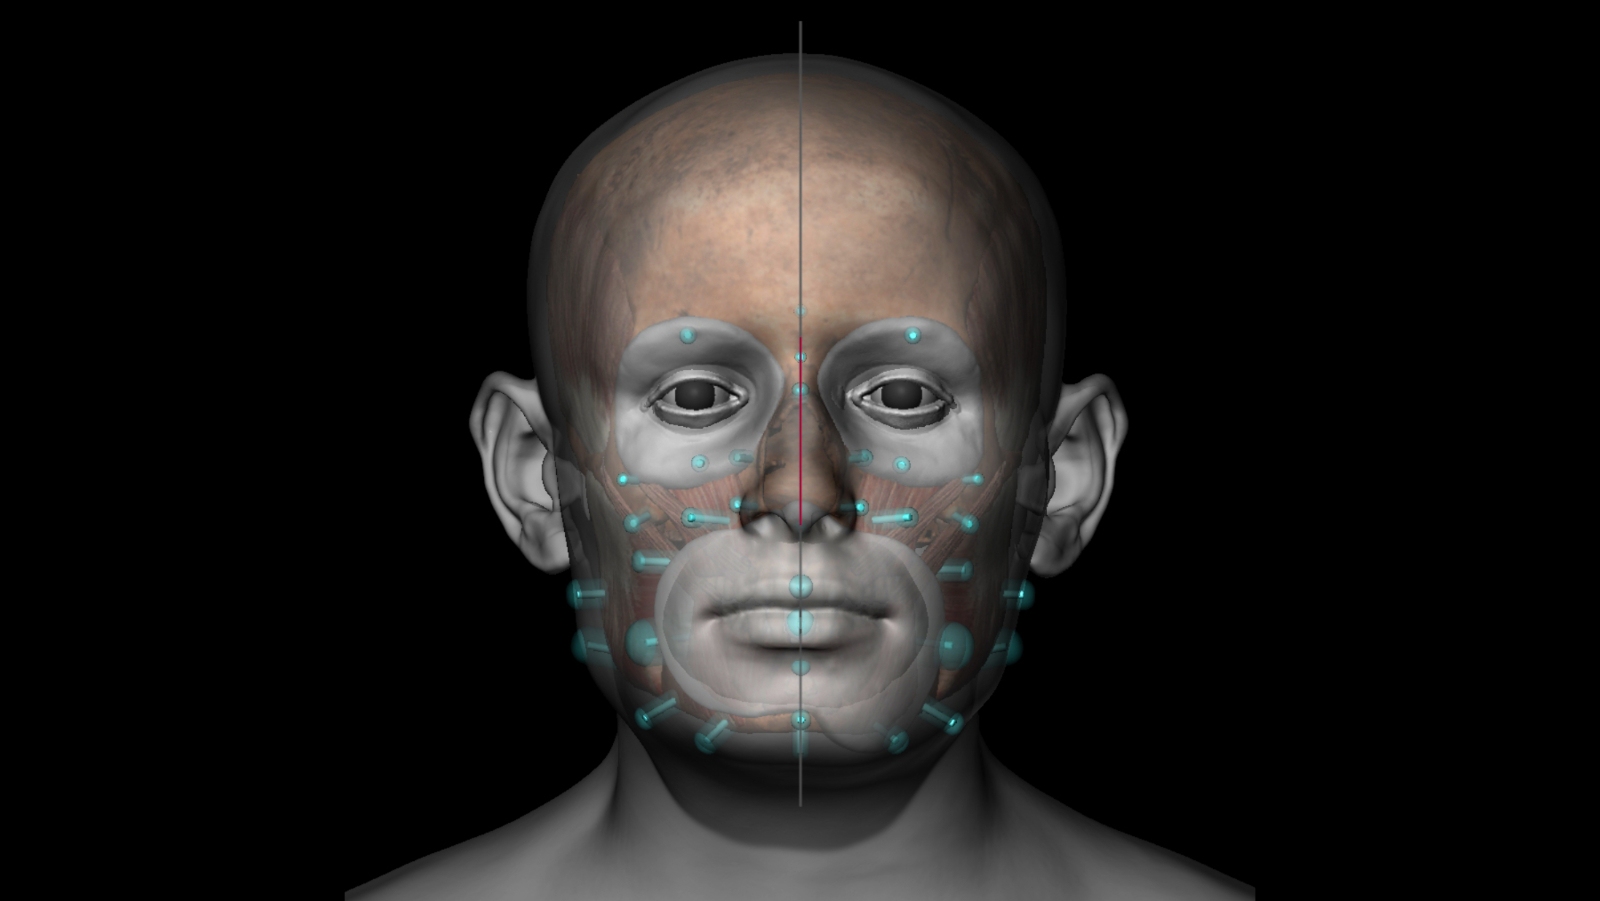 The project includes facial reconstruction by cranio-facial anthropologist, Dr Chris Rynn.